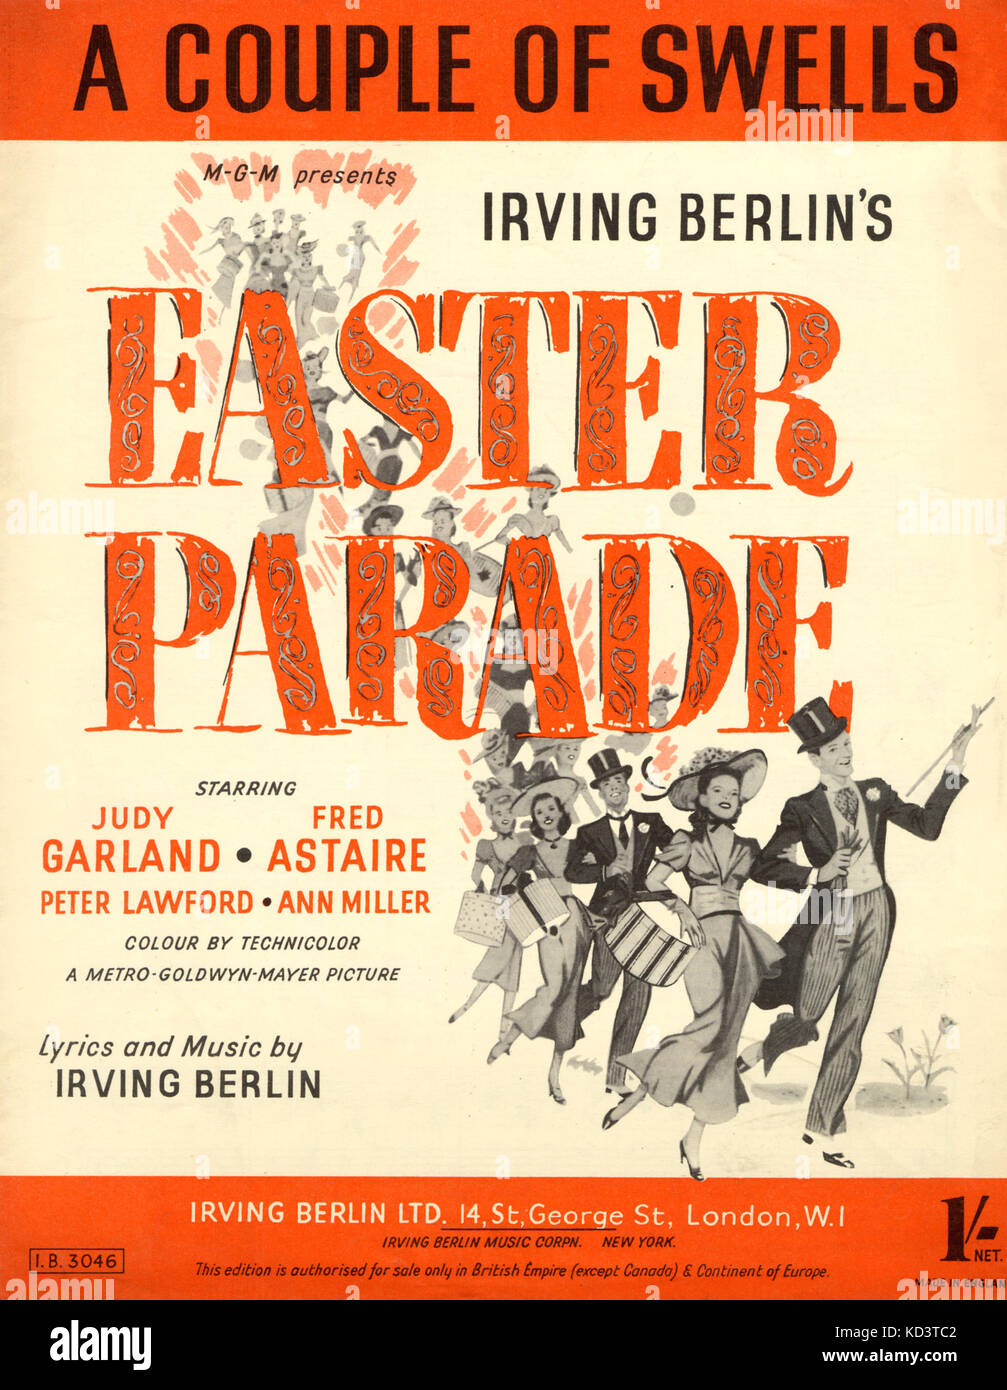 BERLIN, Irving - 'Easter Parade - title page to 'A Couple of Swells' in the musical 'Easter Parade'. London: Irving Berlin Ltd, 1947. Fred Astaire and Judy Garland caricatures also pictured.  American composer, 1888-1989. Stock Photo